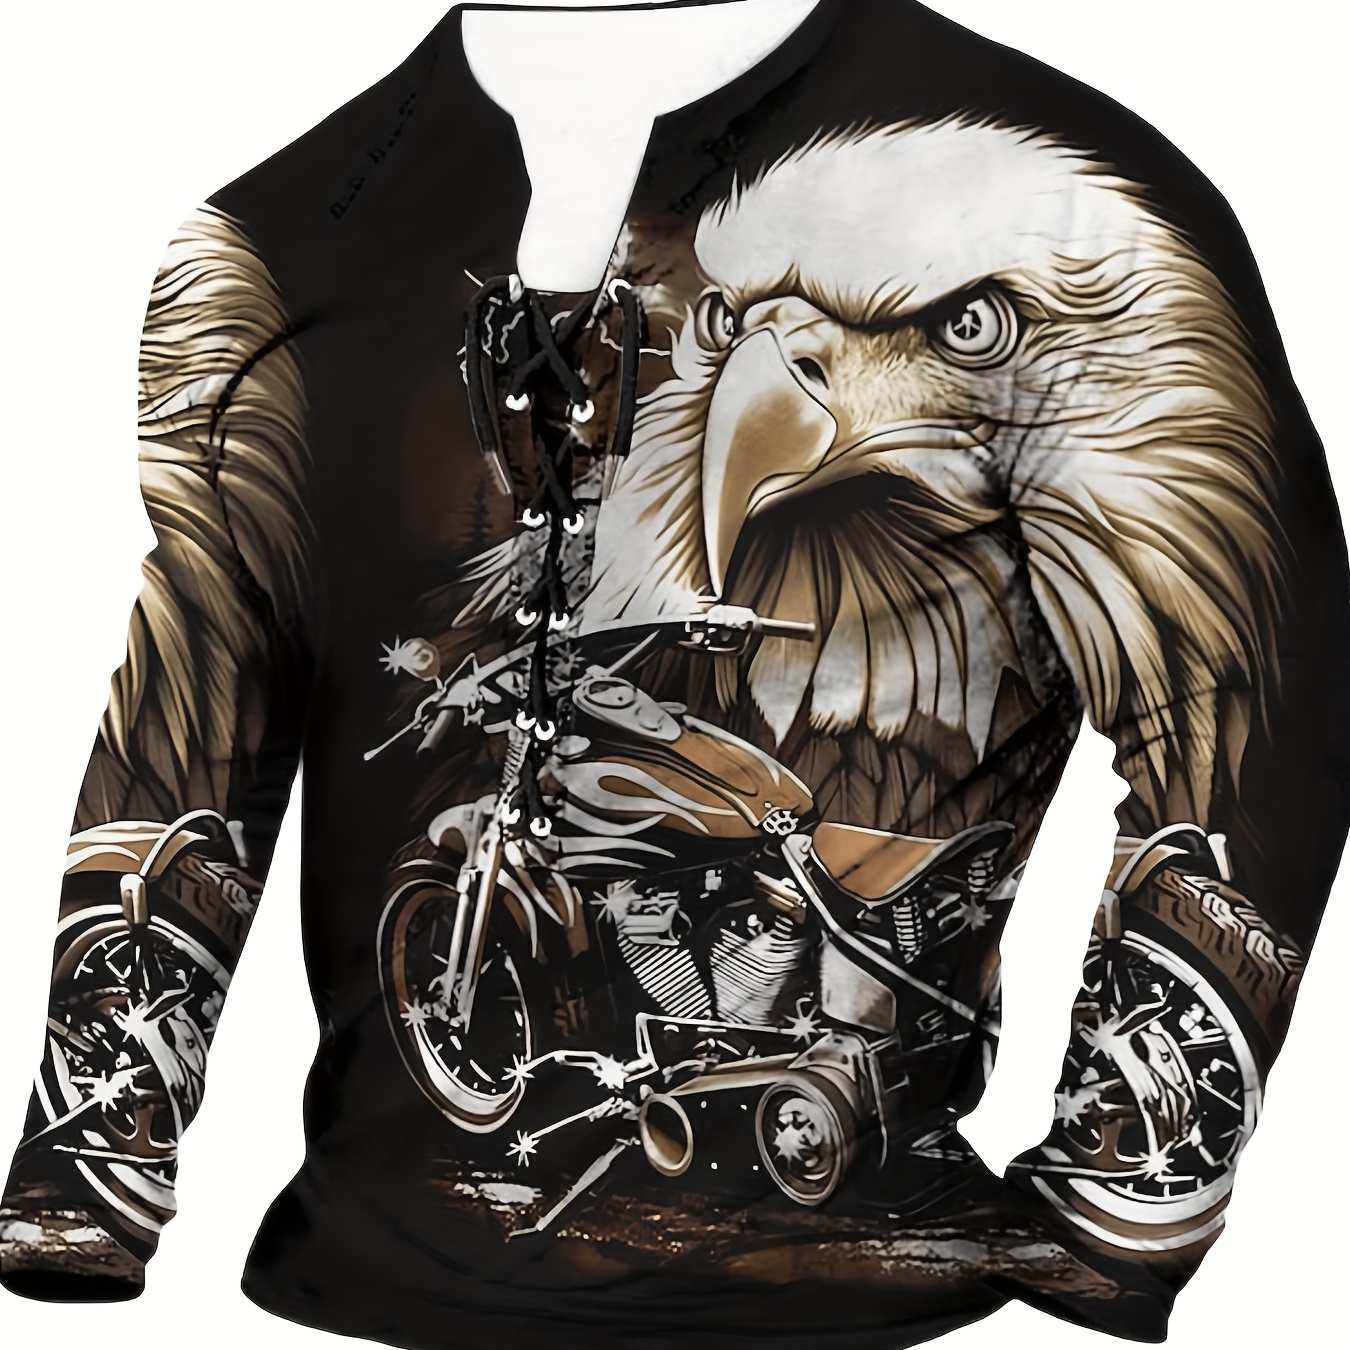 

3d Eagle Pattern Print, Men's Graphic Design V Neck Long Sleeve Henley T-shirt Tee, Casual Comfy Shirts For Spring Summer Autumn, Men's Clothing Tops